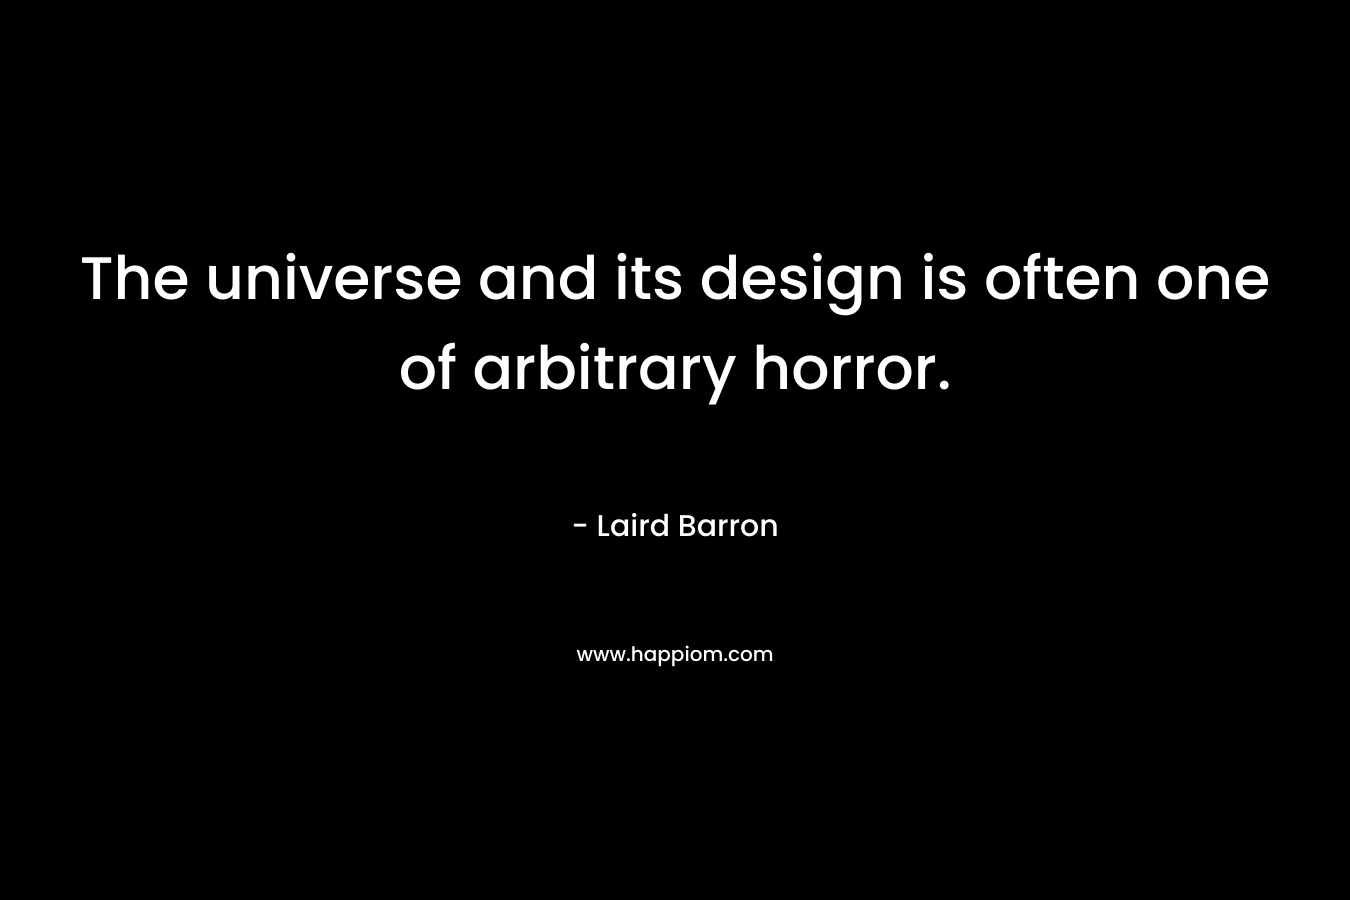 The universe and its design is often one of arbitrary horror. – Laird Barron